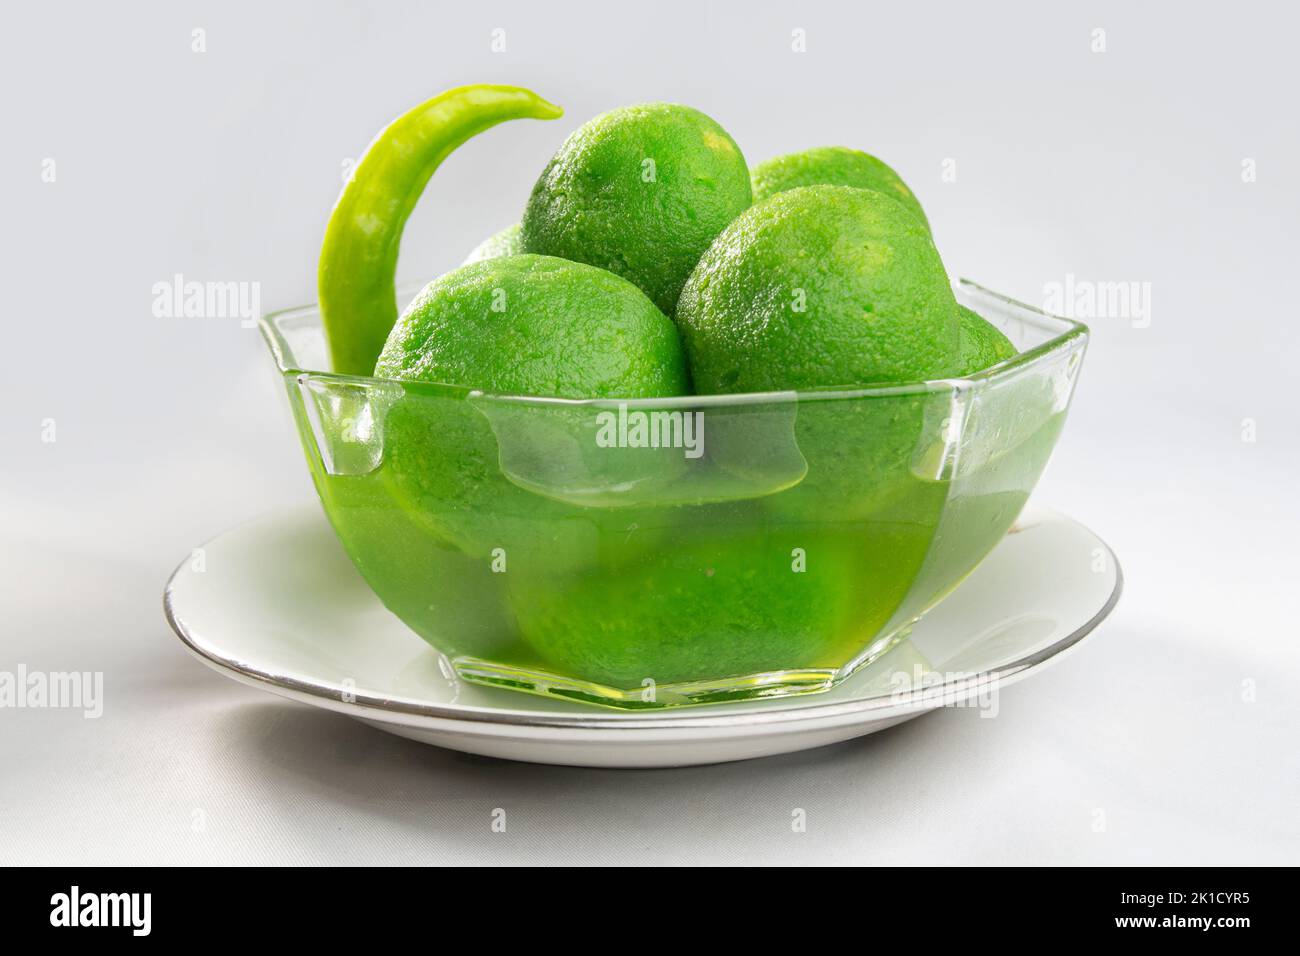 Chili sweets on bowl. green colored, chilli flavored, hot and sweet taste. unusual odd taste. Stock Photo